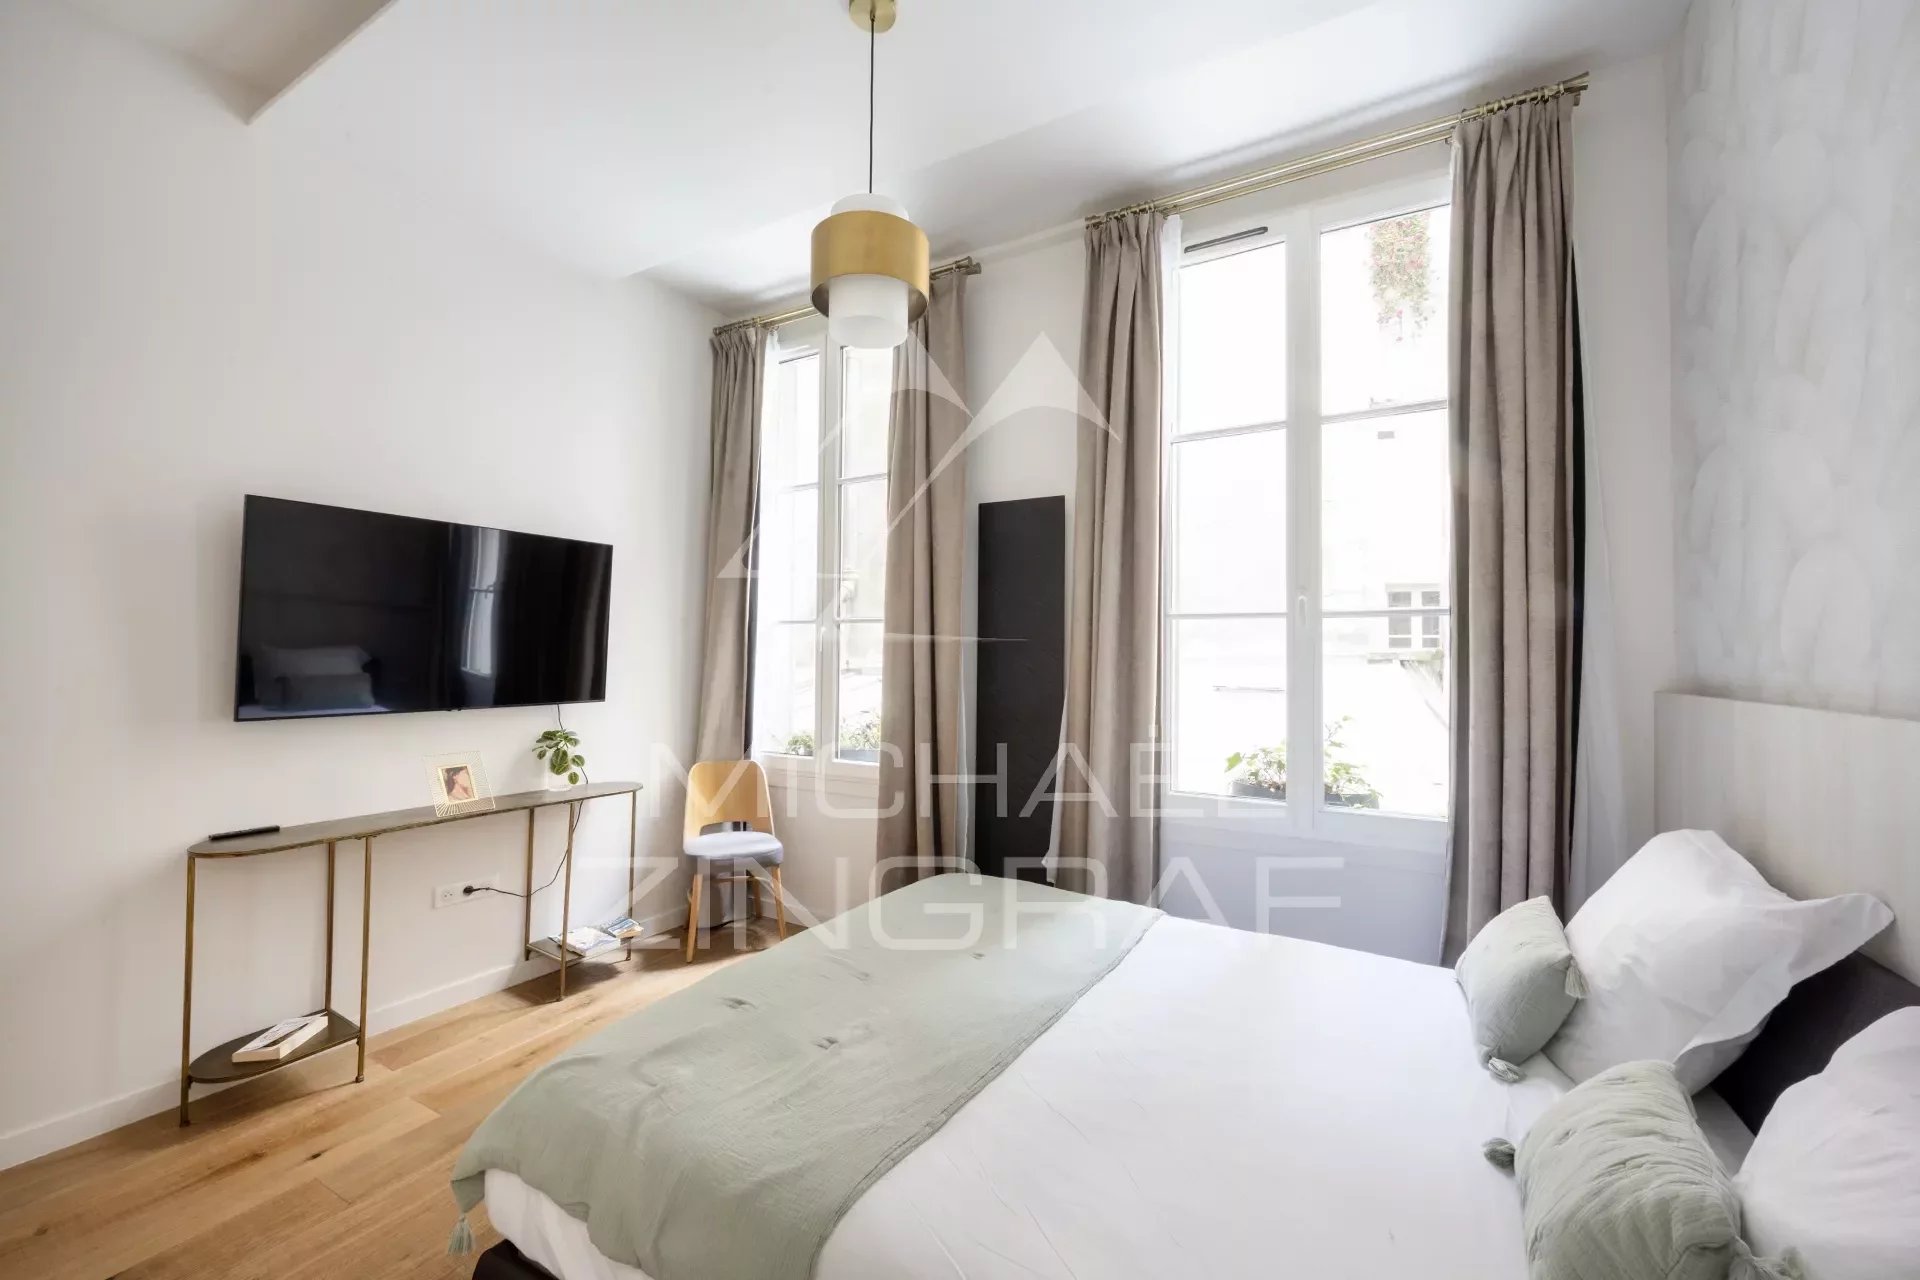 Sale apartment - full heart of the Marais - completely renovated